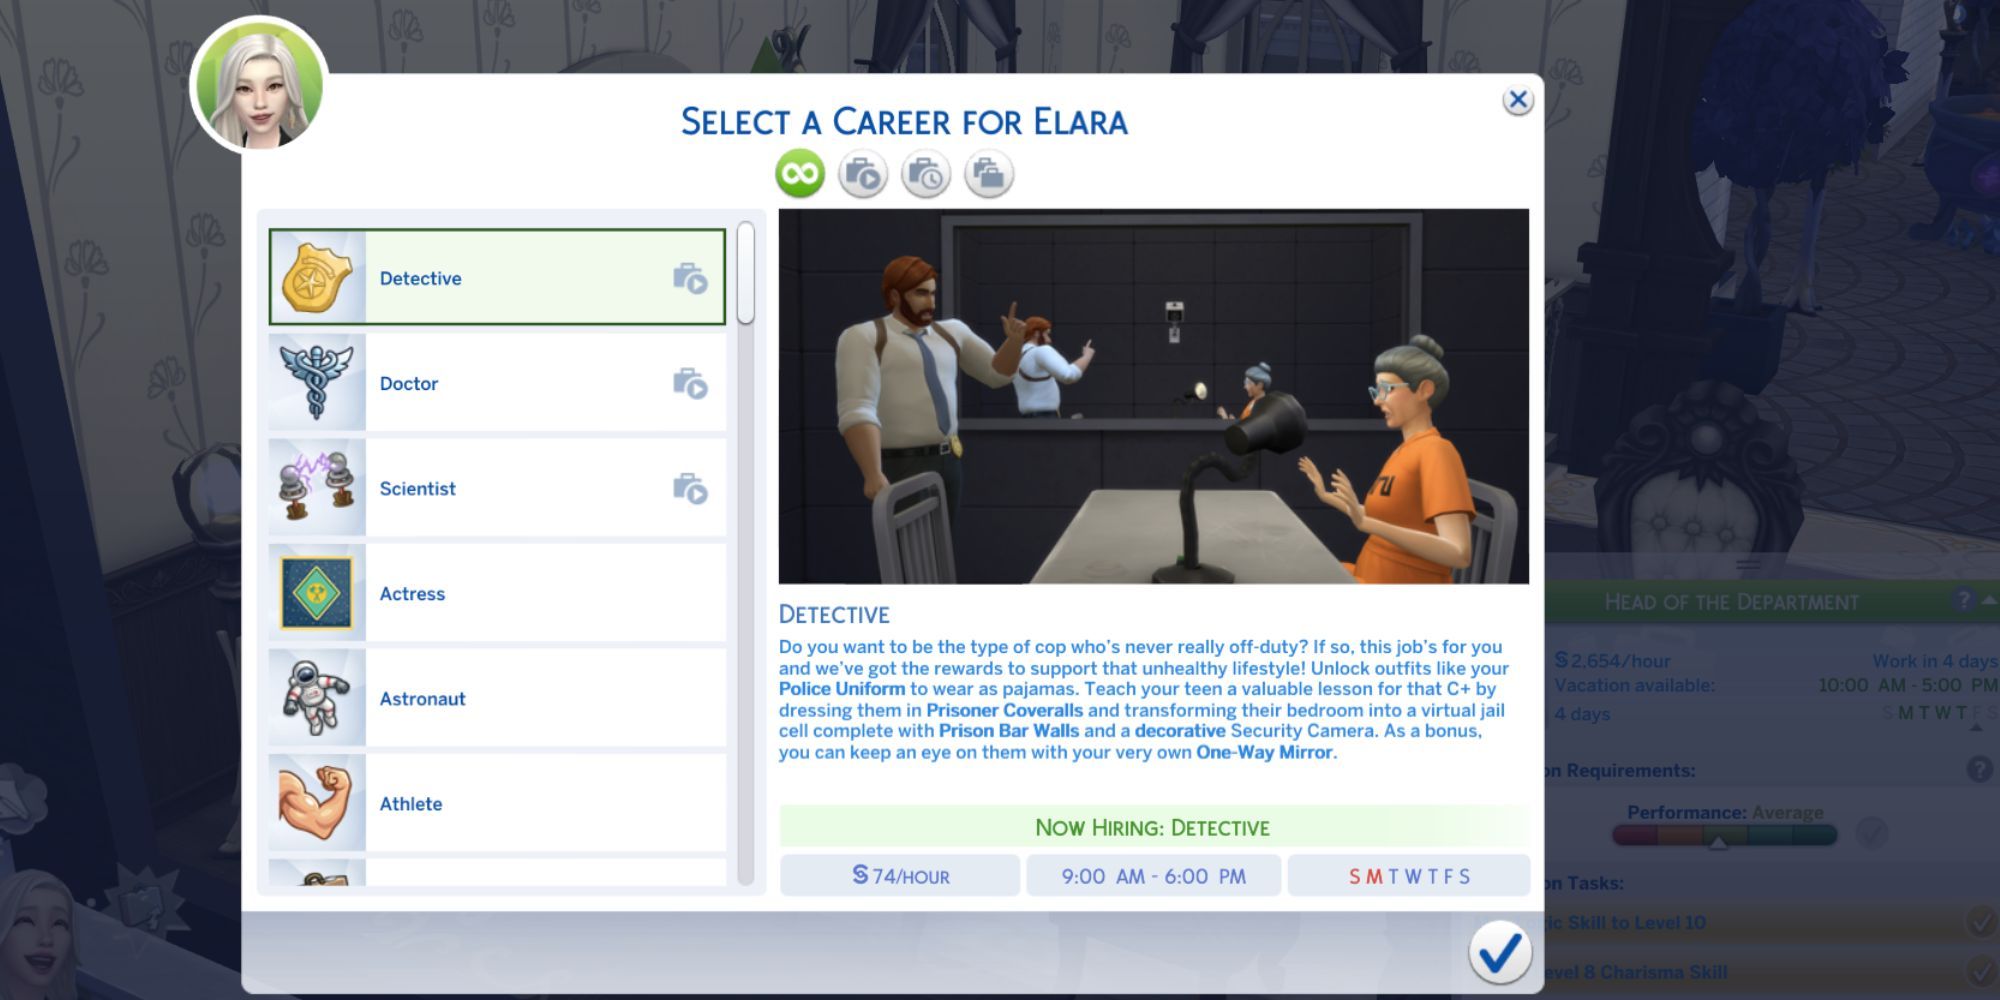 The Sims 4 Careers